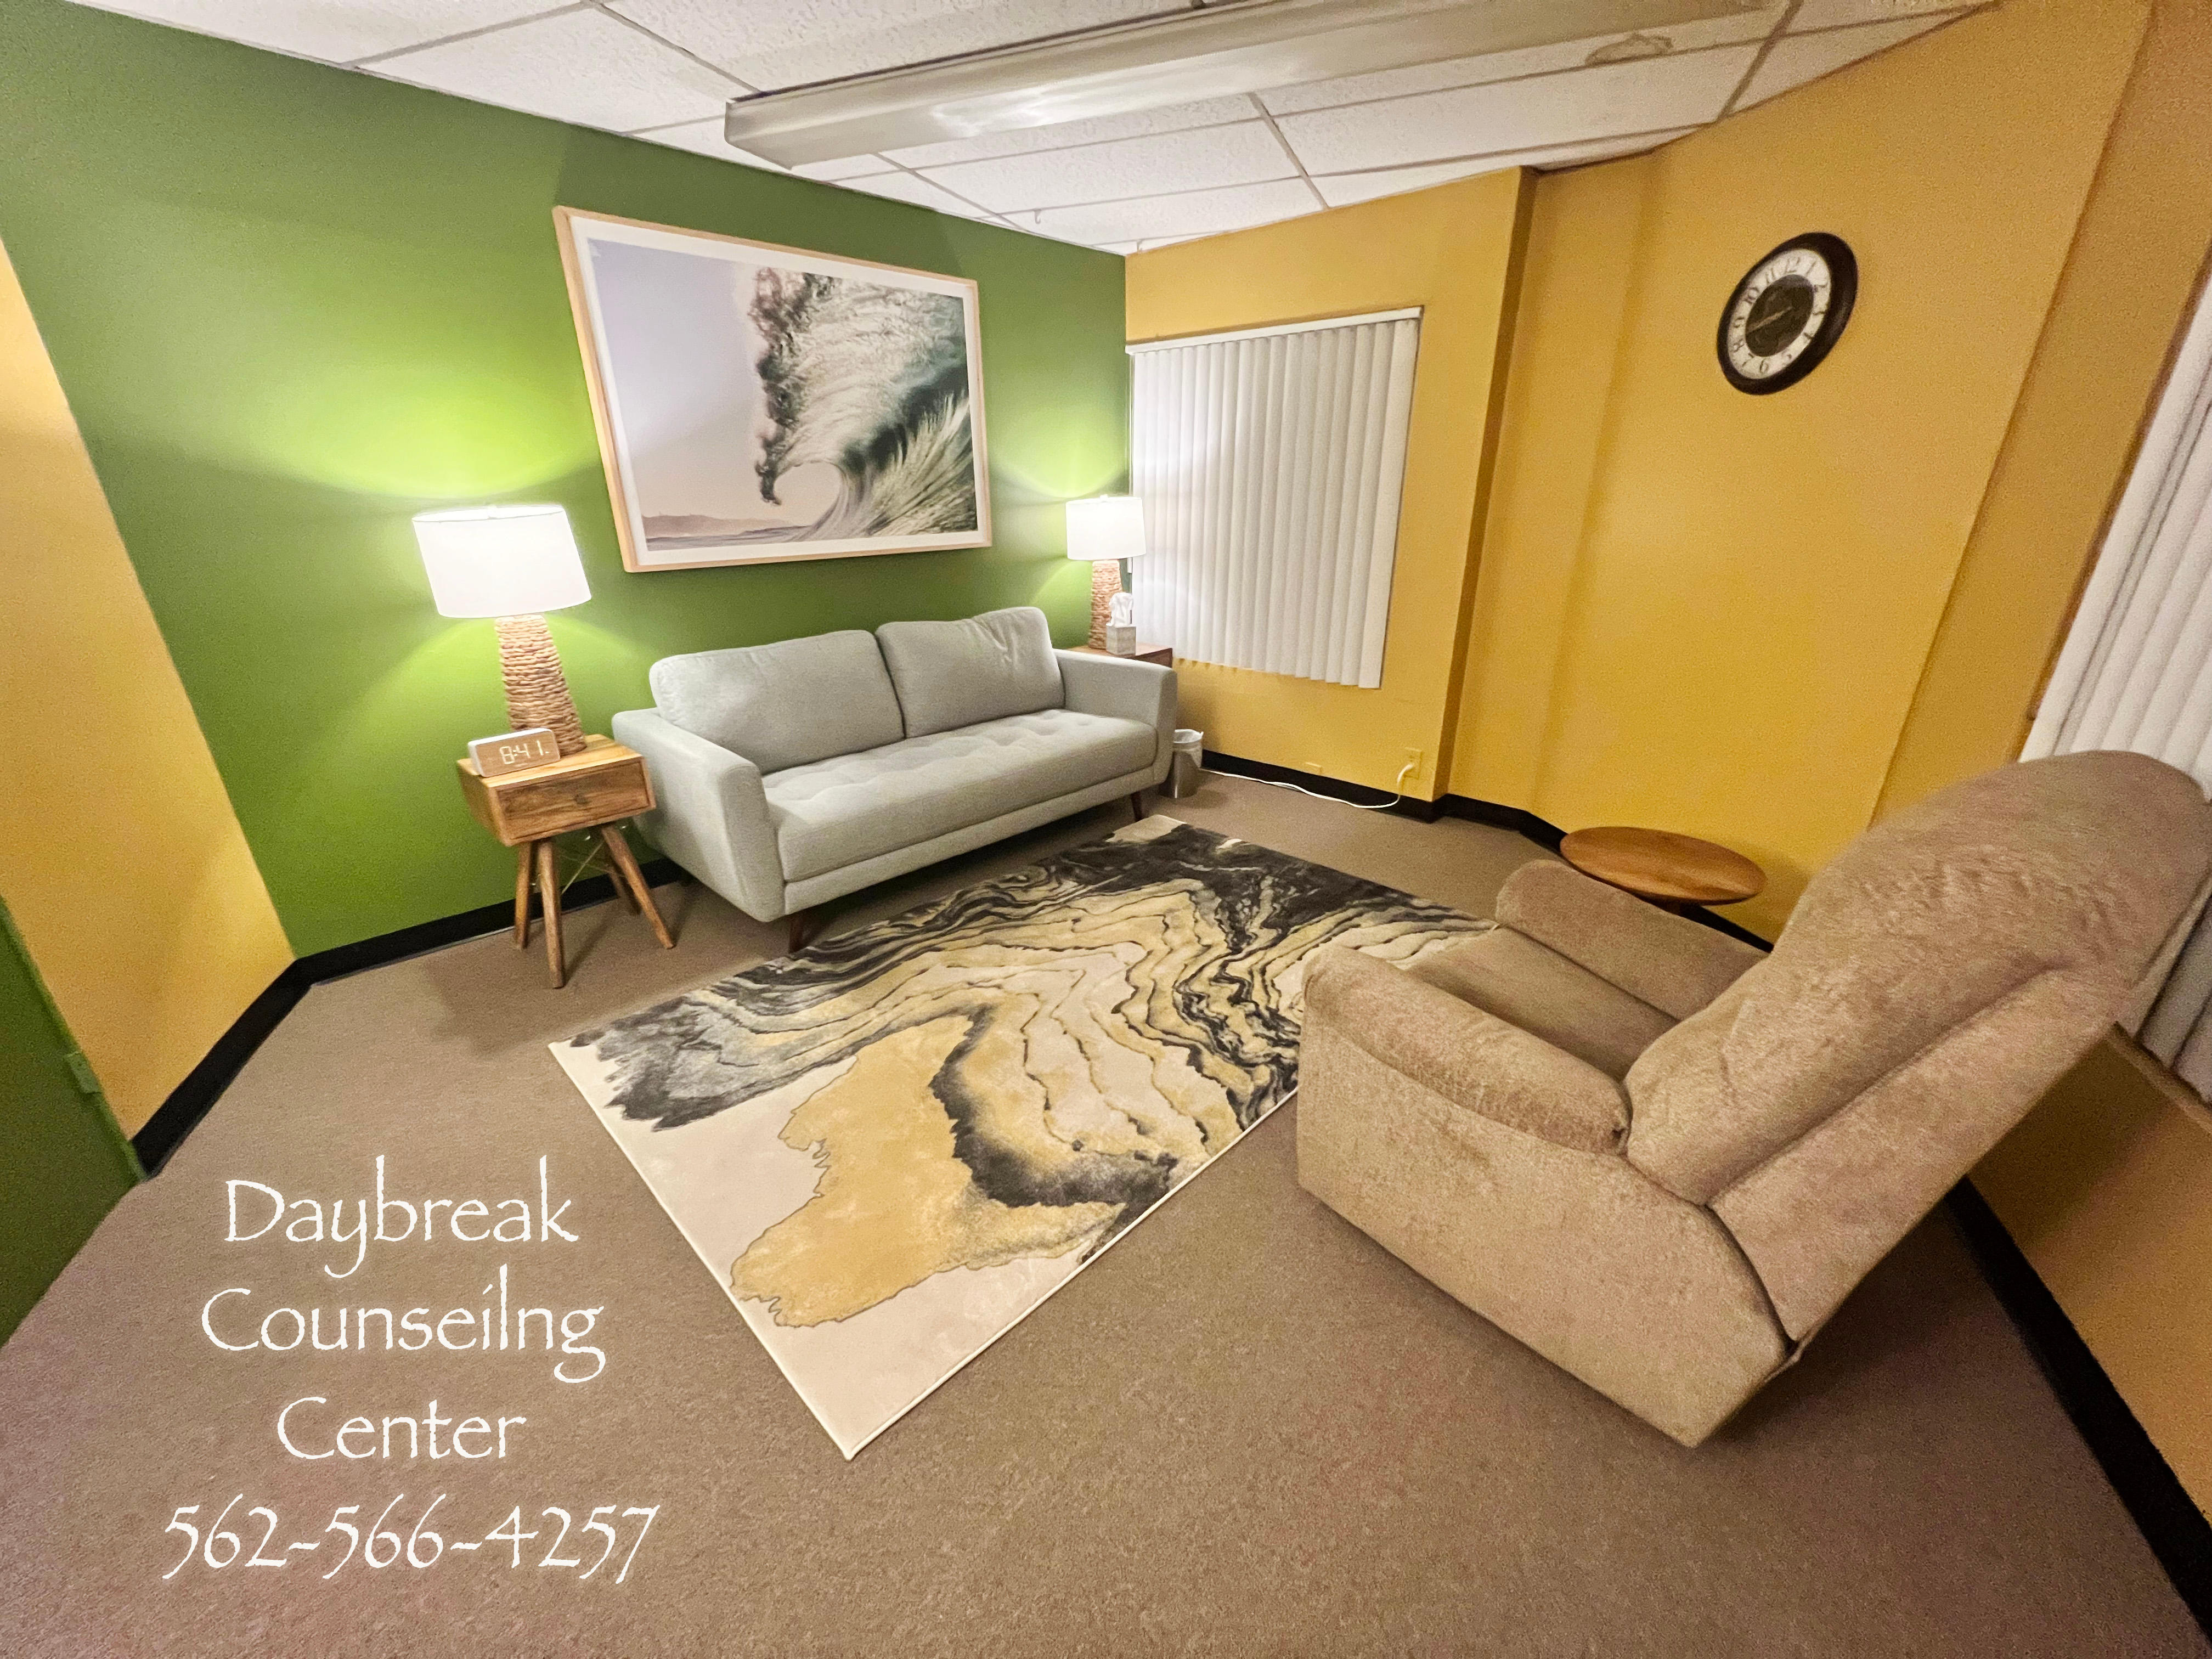 Daybreak Counseling Center 
Suite #202